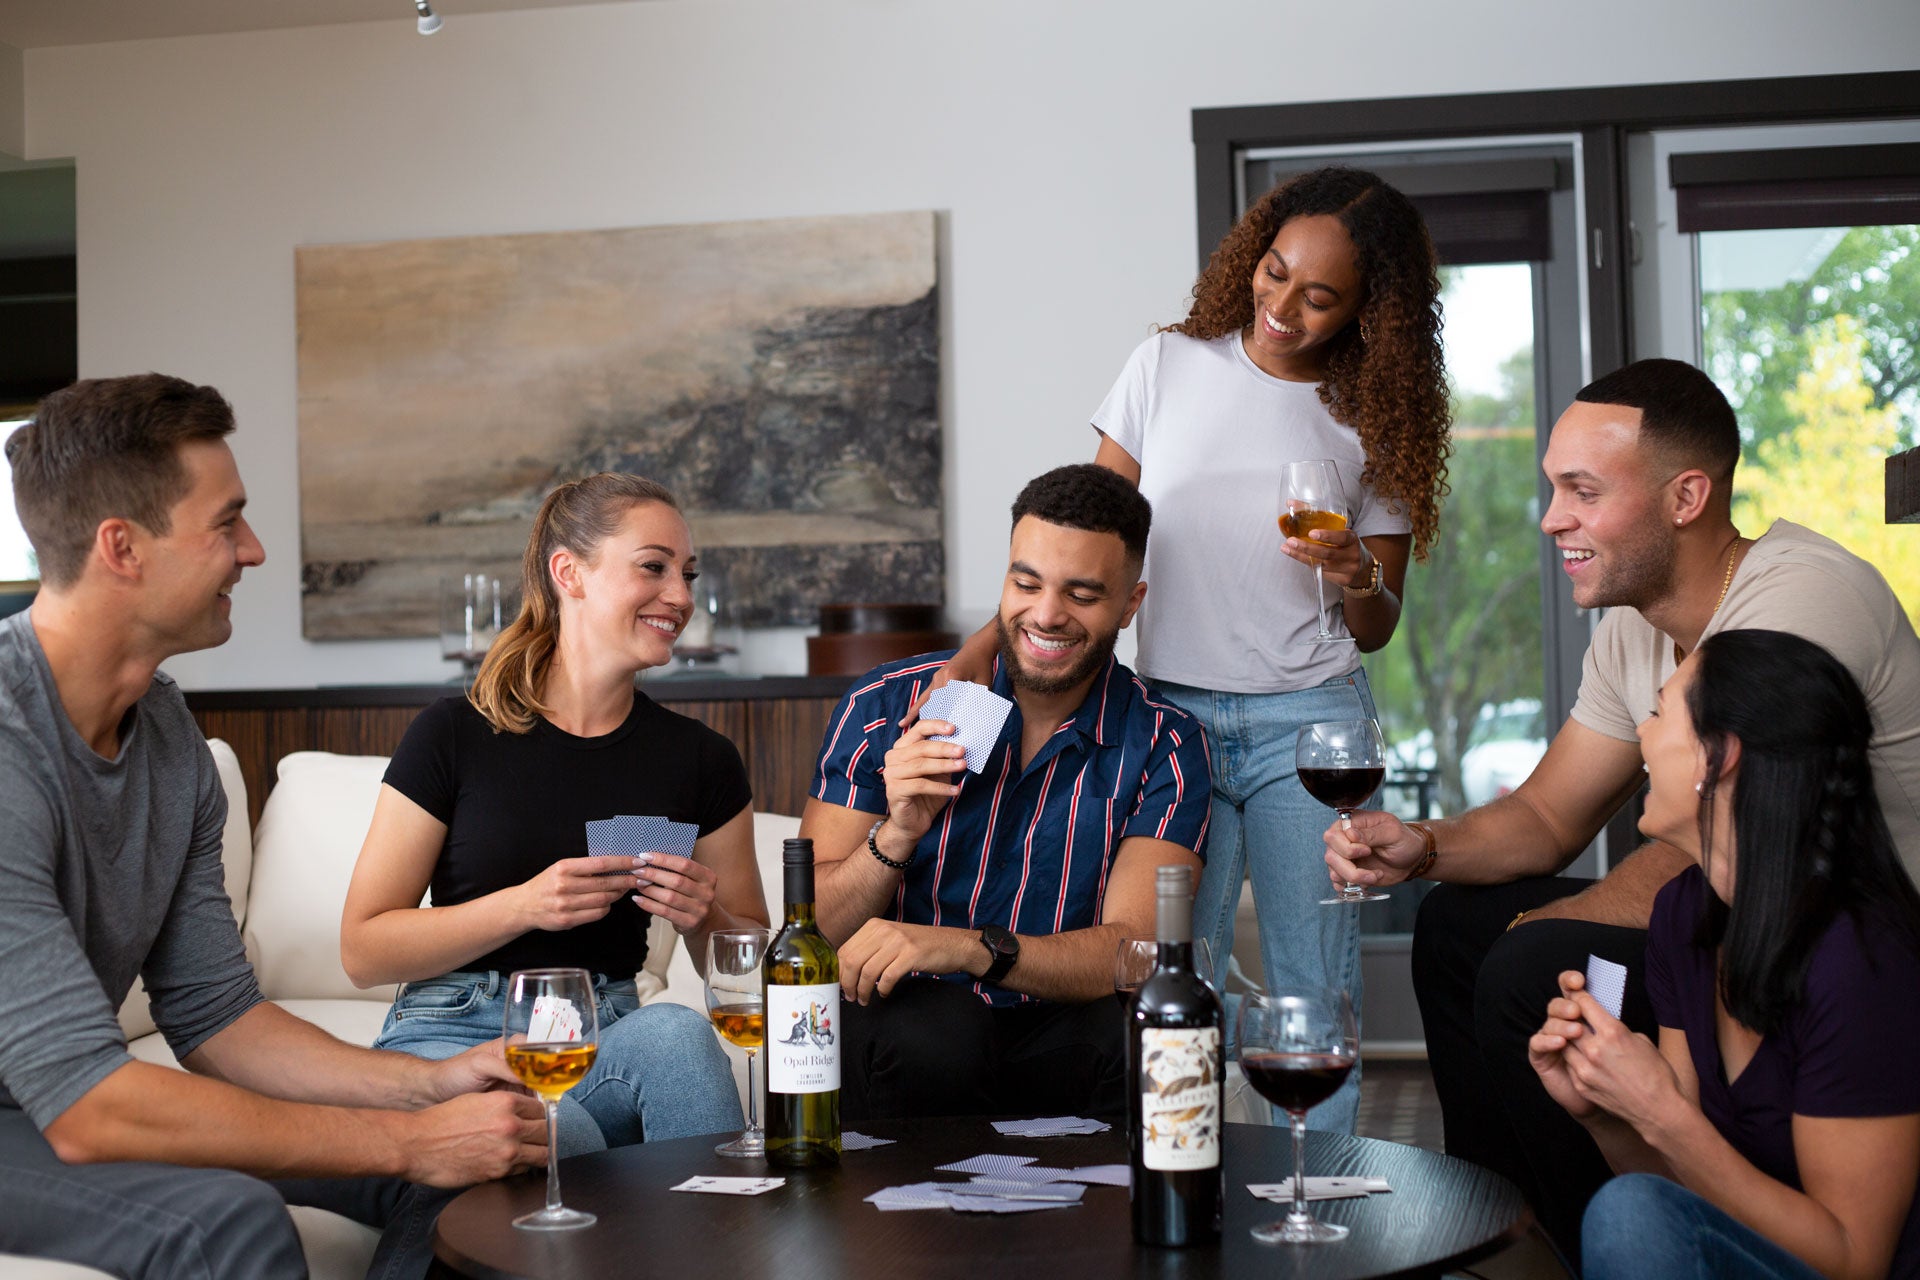 group of people enjoying wine and games